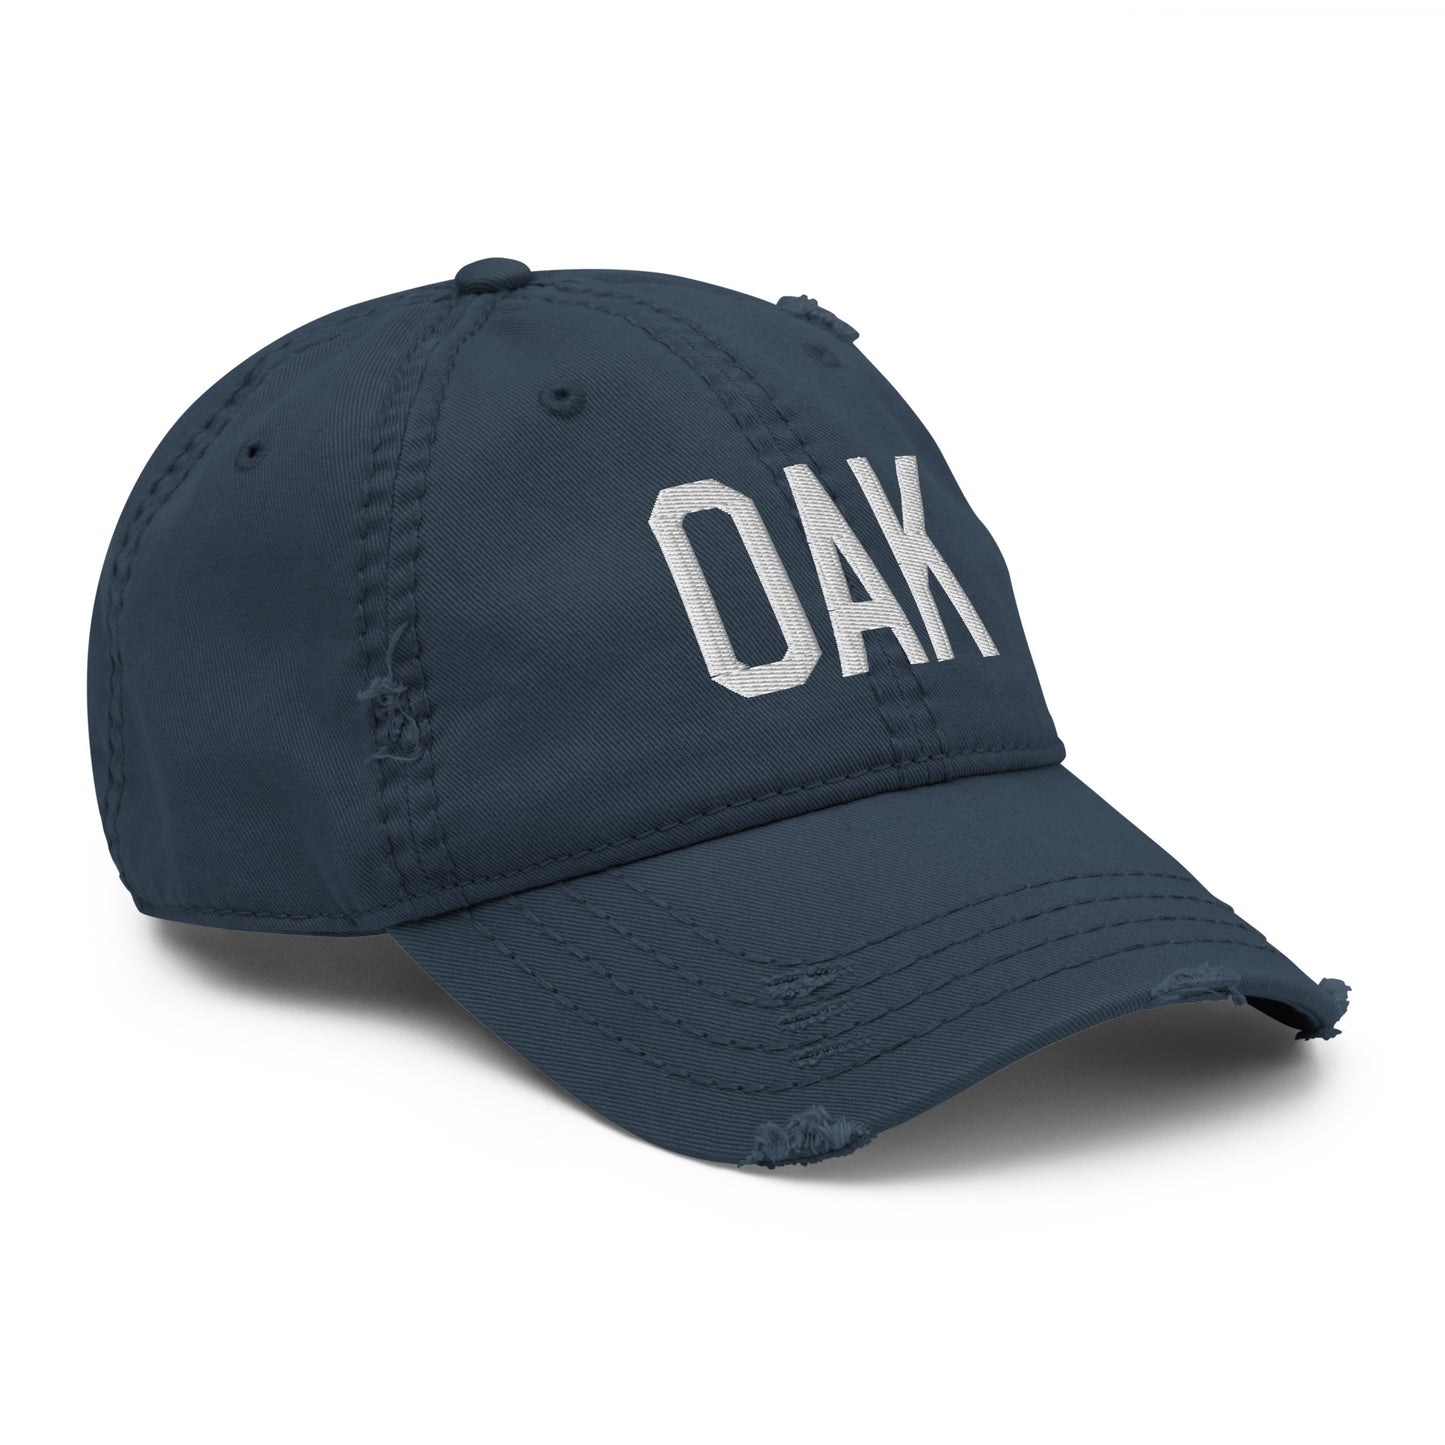 Airport Code Distressed Hat - White • OAK Oakland • YHM Designs - Image 14